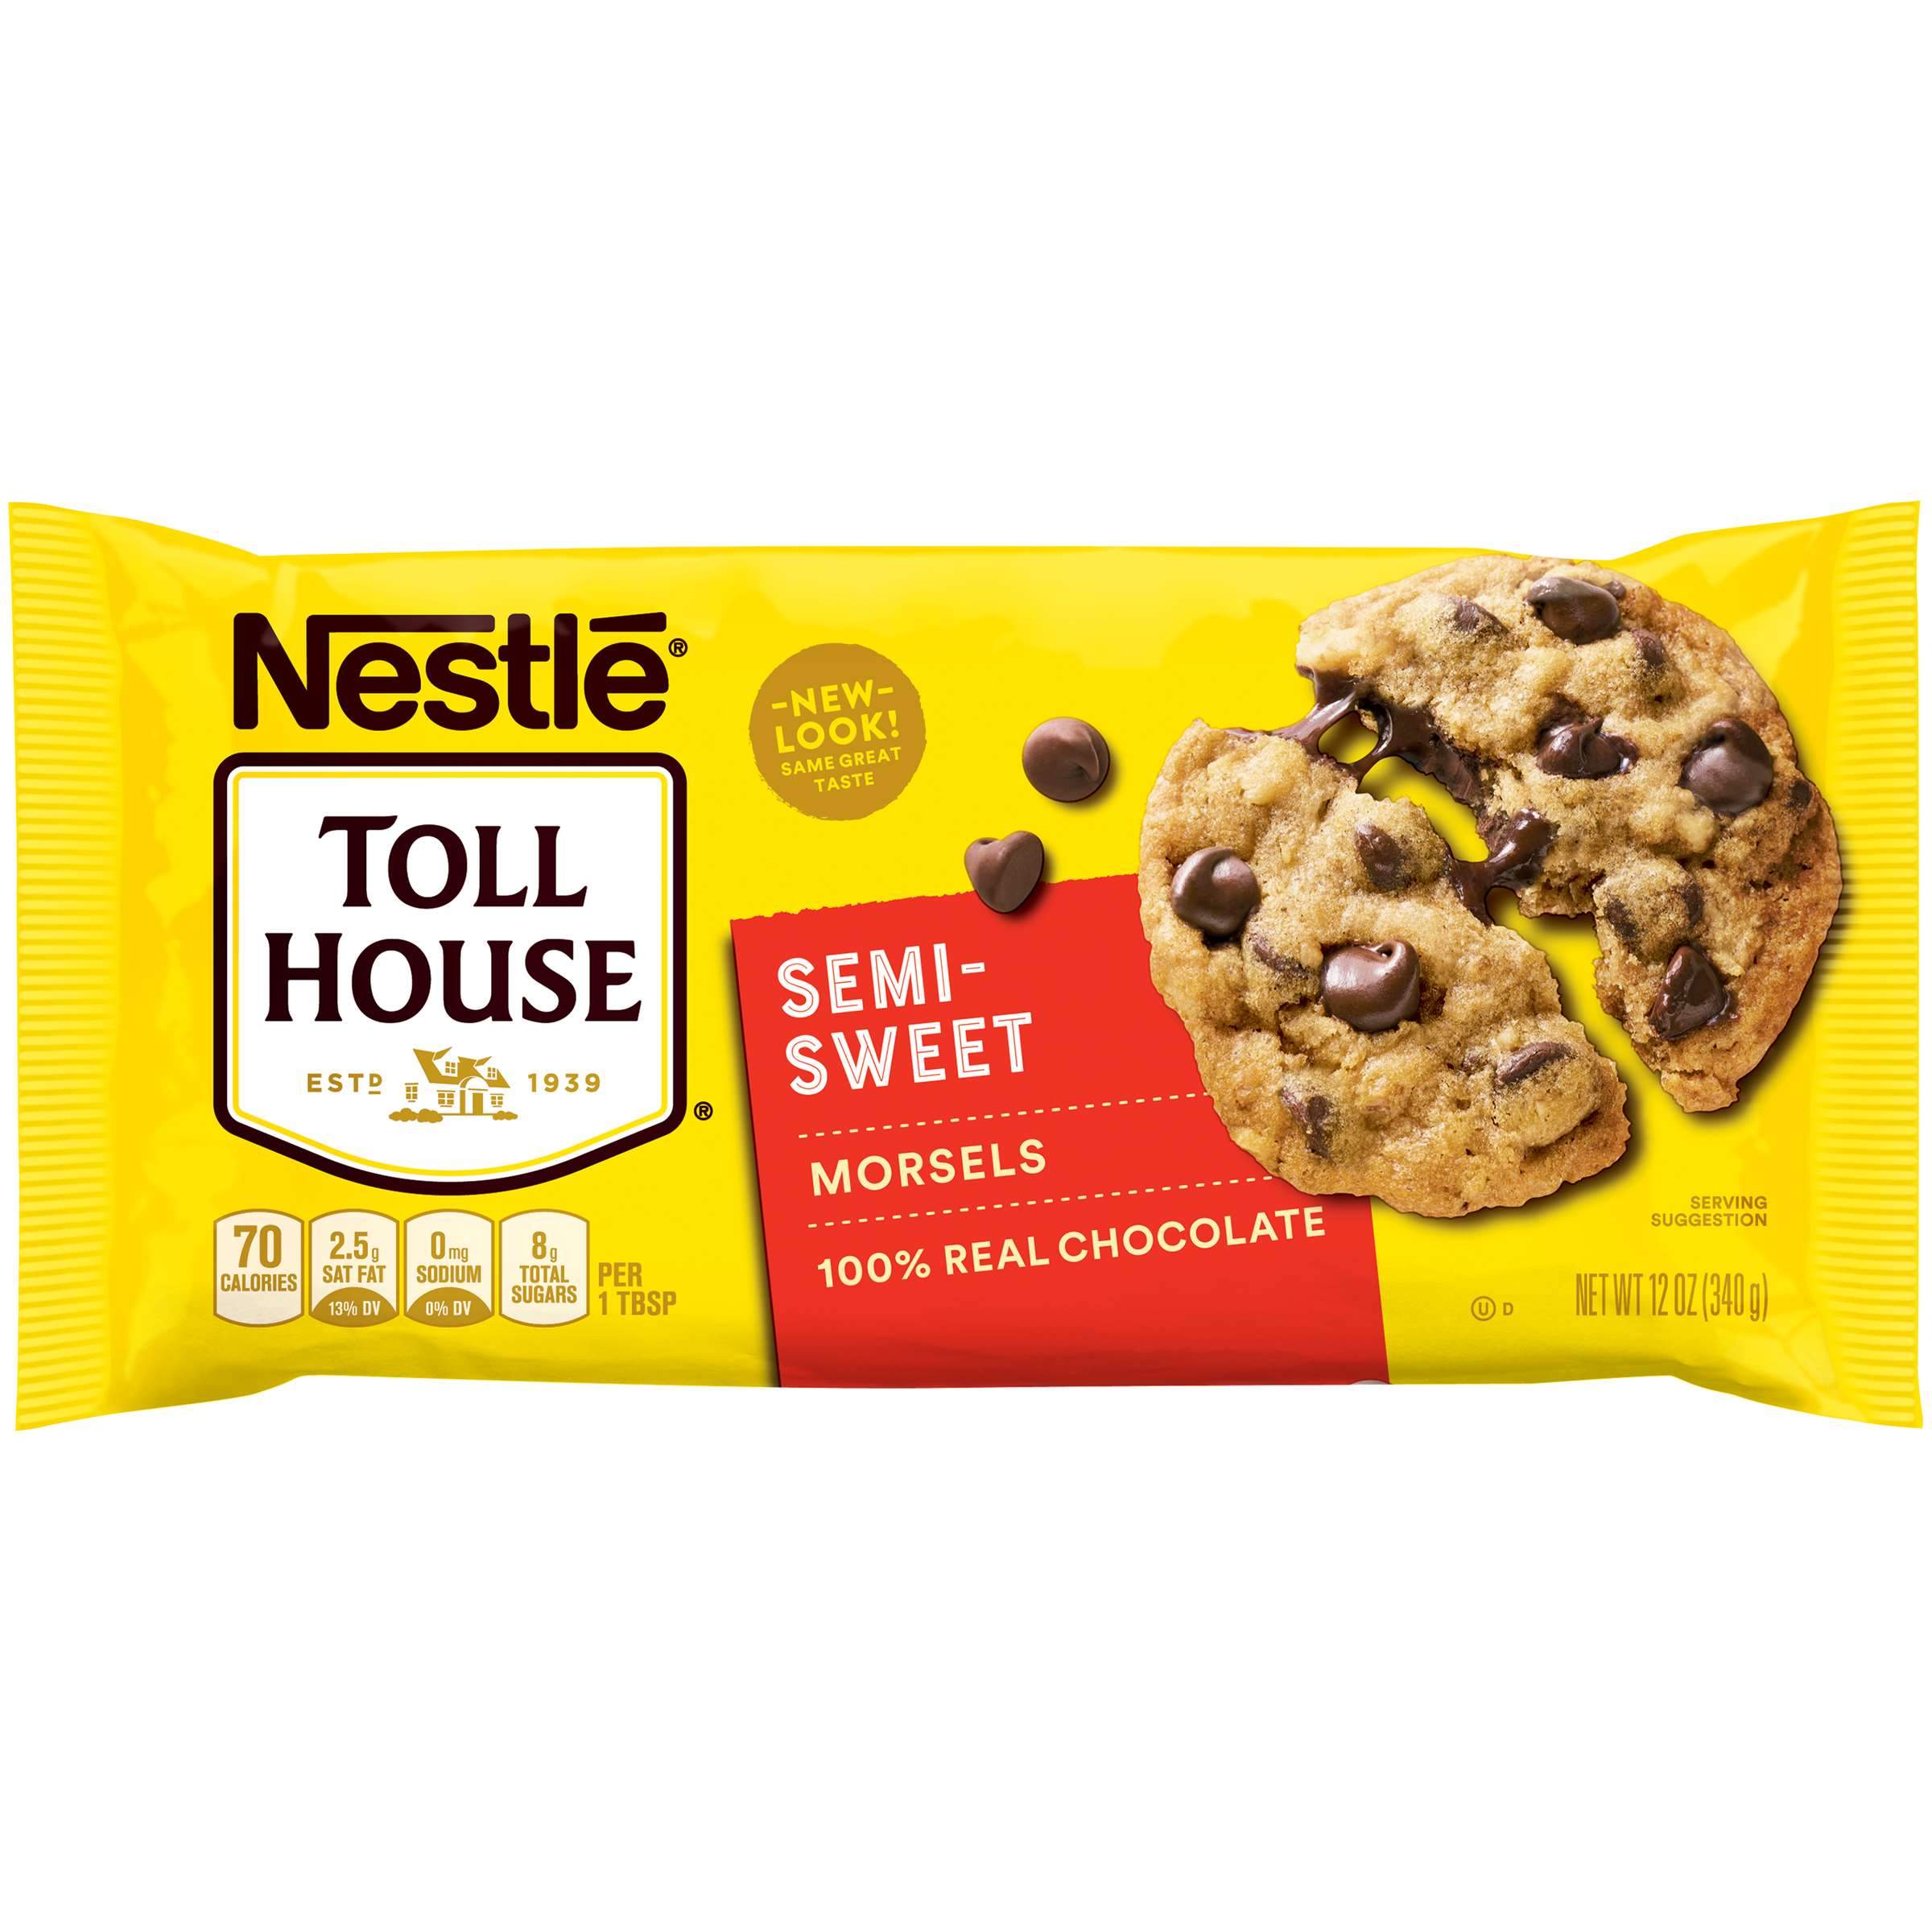 Nestlé Toll House Baking Morsels Toll House Semi-Sweet 12 Ounce 